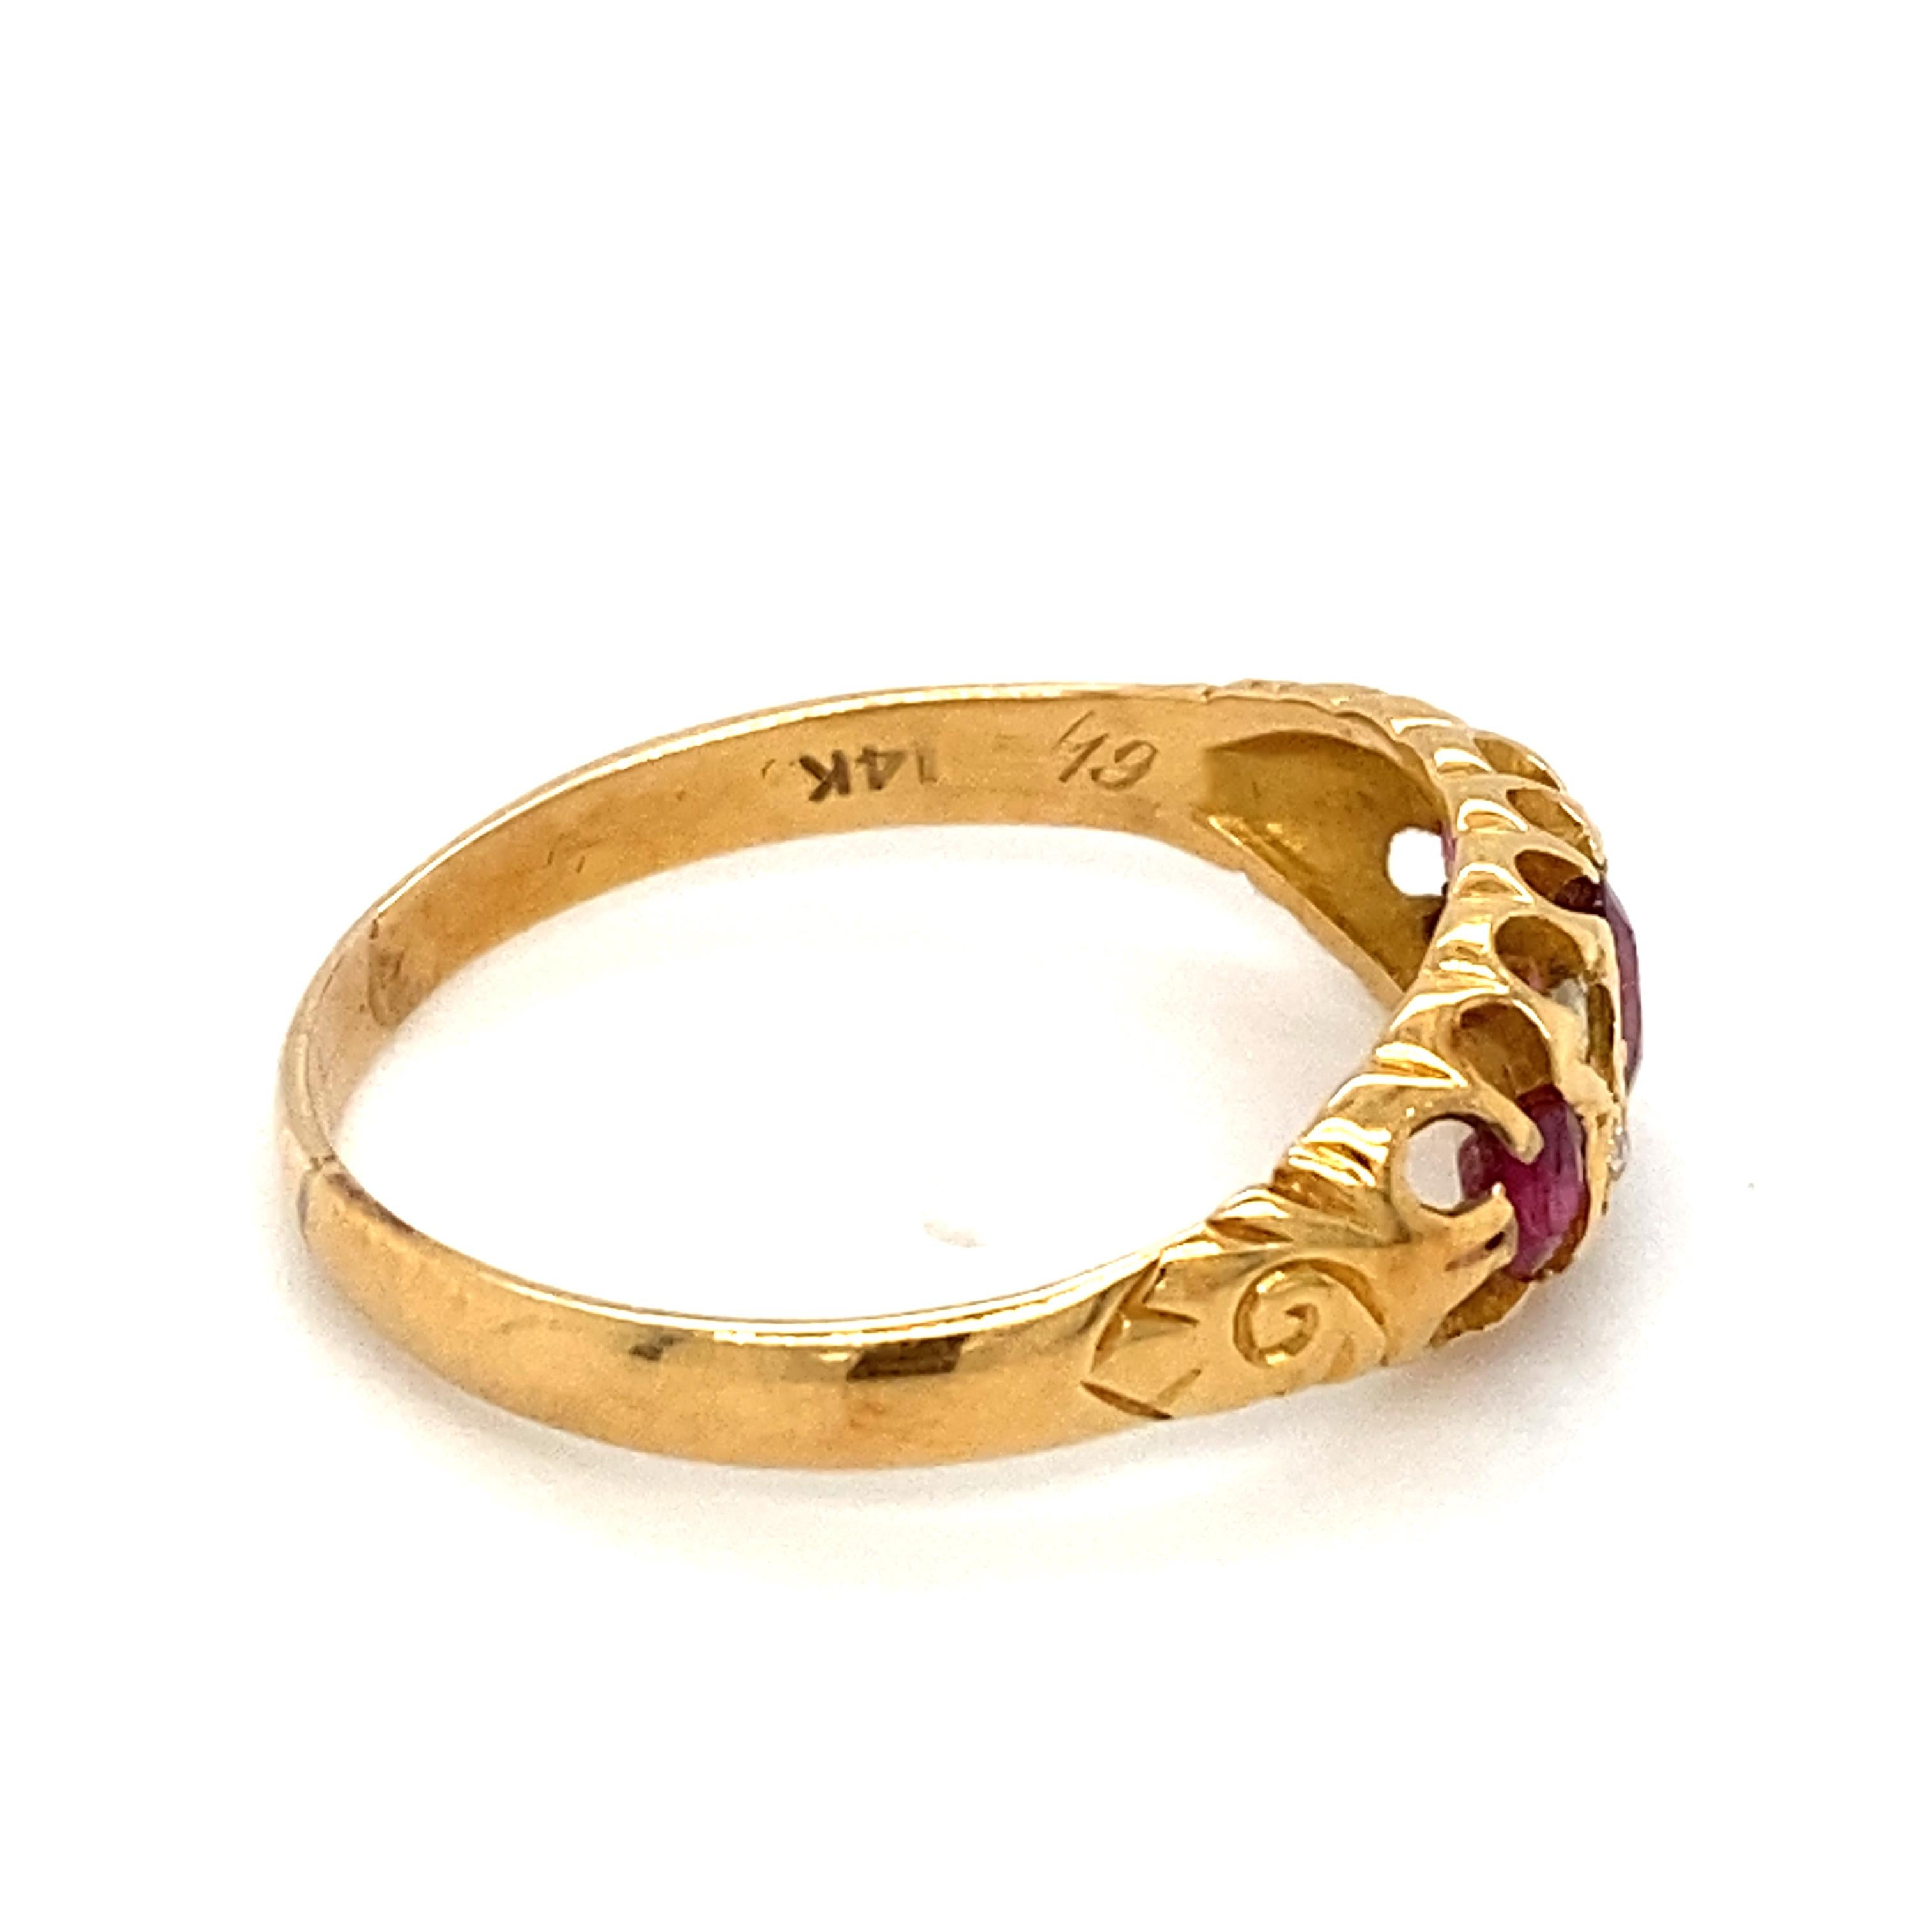 Circa 1910s Edwardian Oval Ruby and Diamond Ring in 14 Karat Yellow Gold For Sale 1